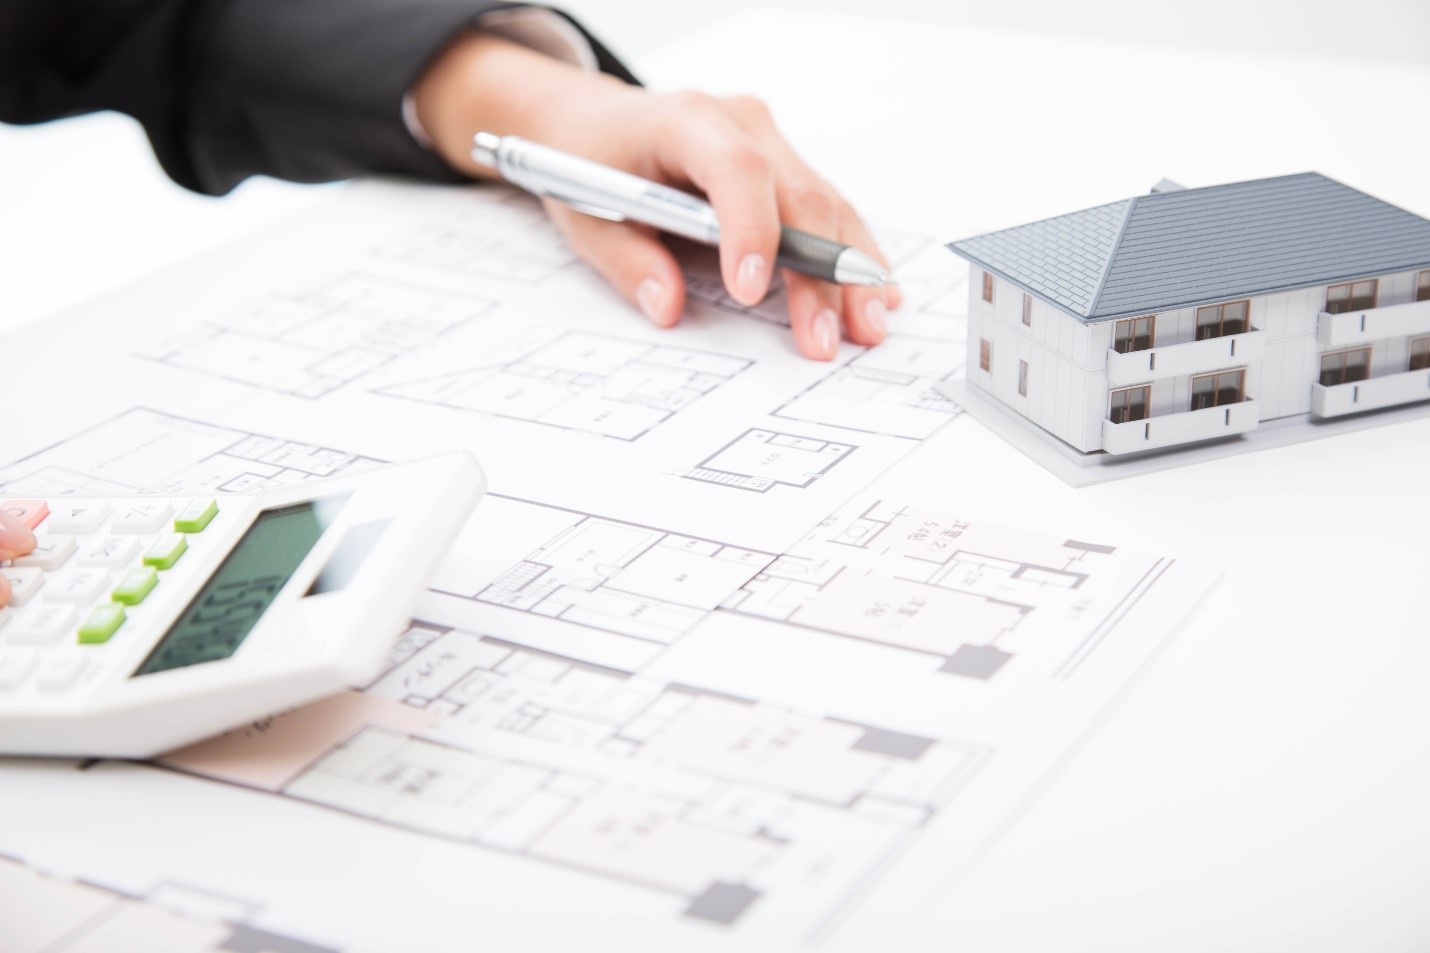 Person reviewing drawing plans for a condominium complex with a pen and calculator in hand